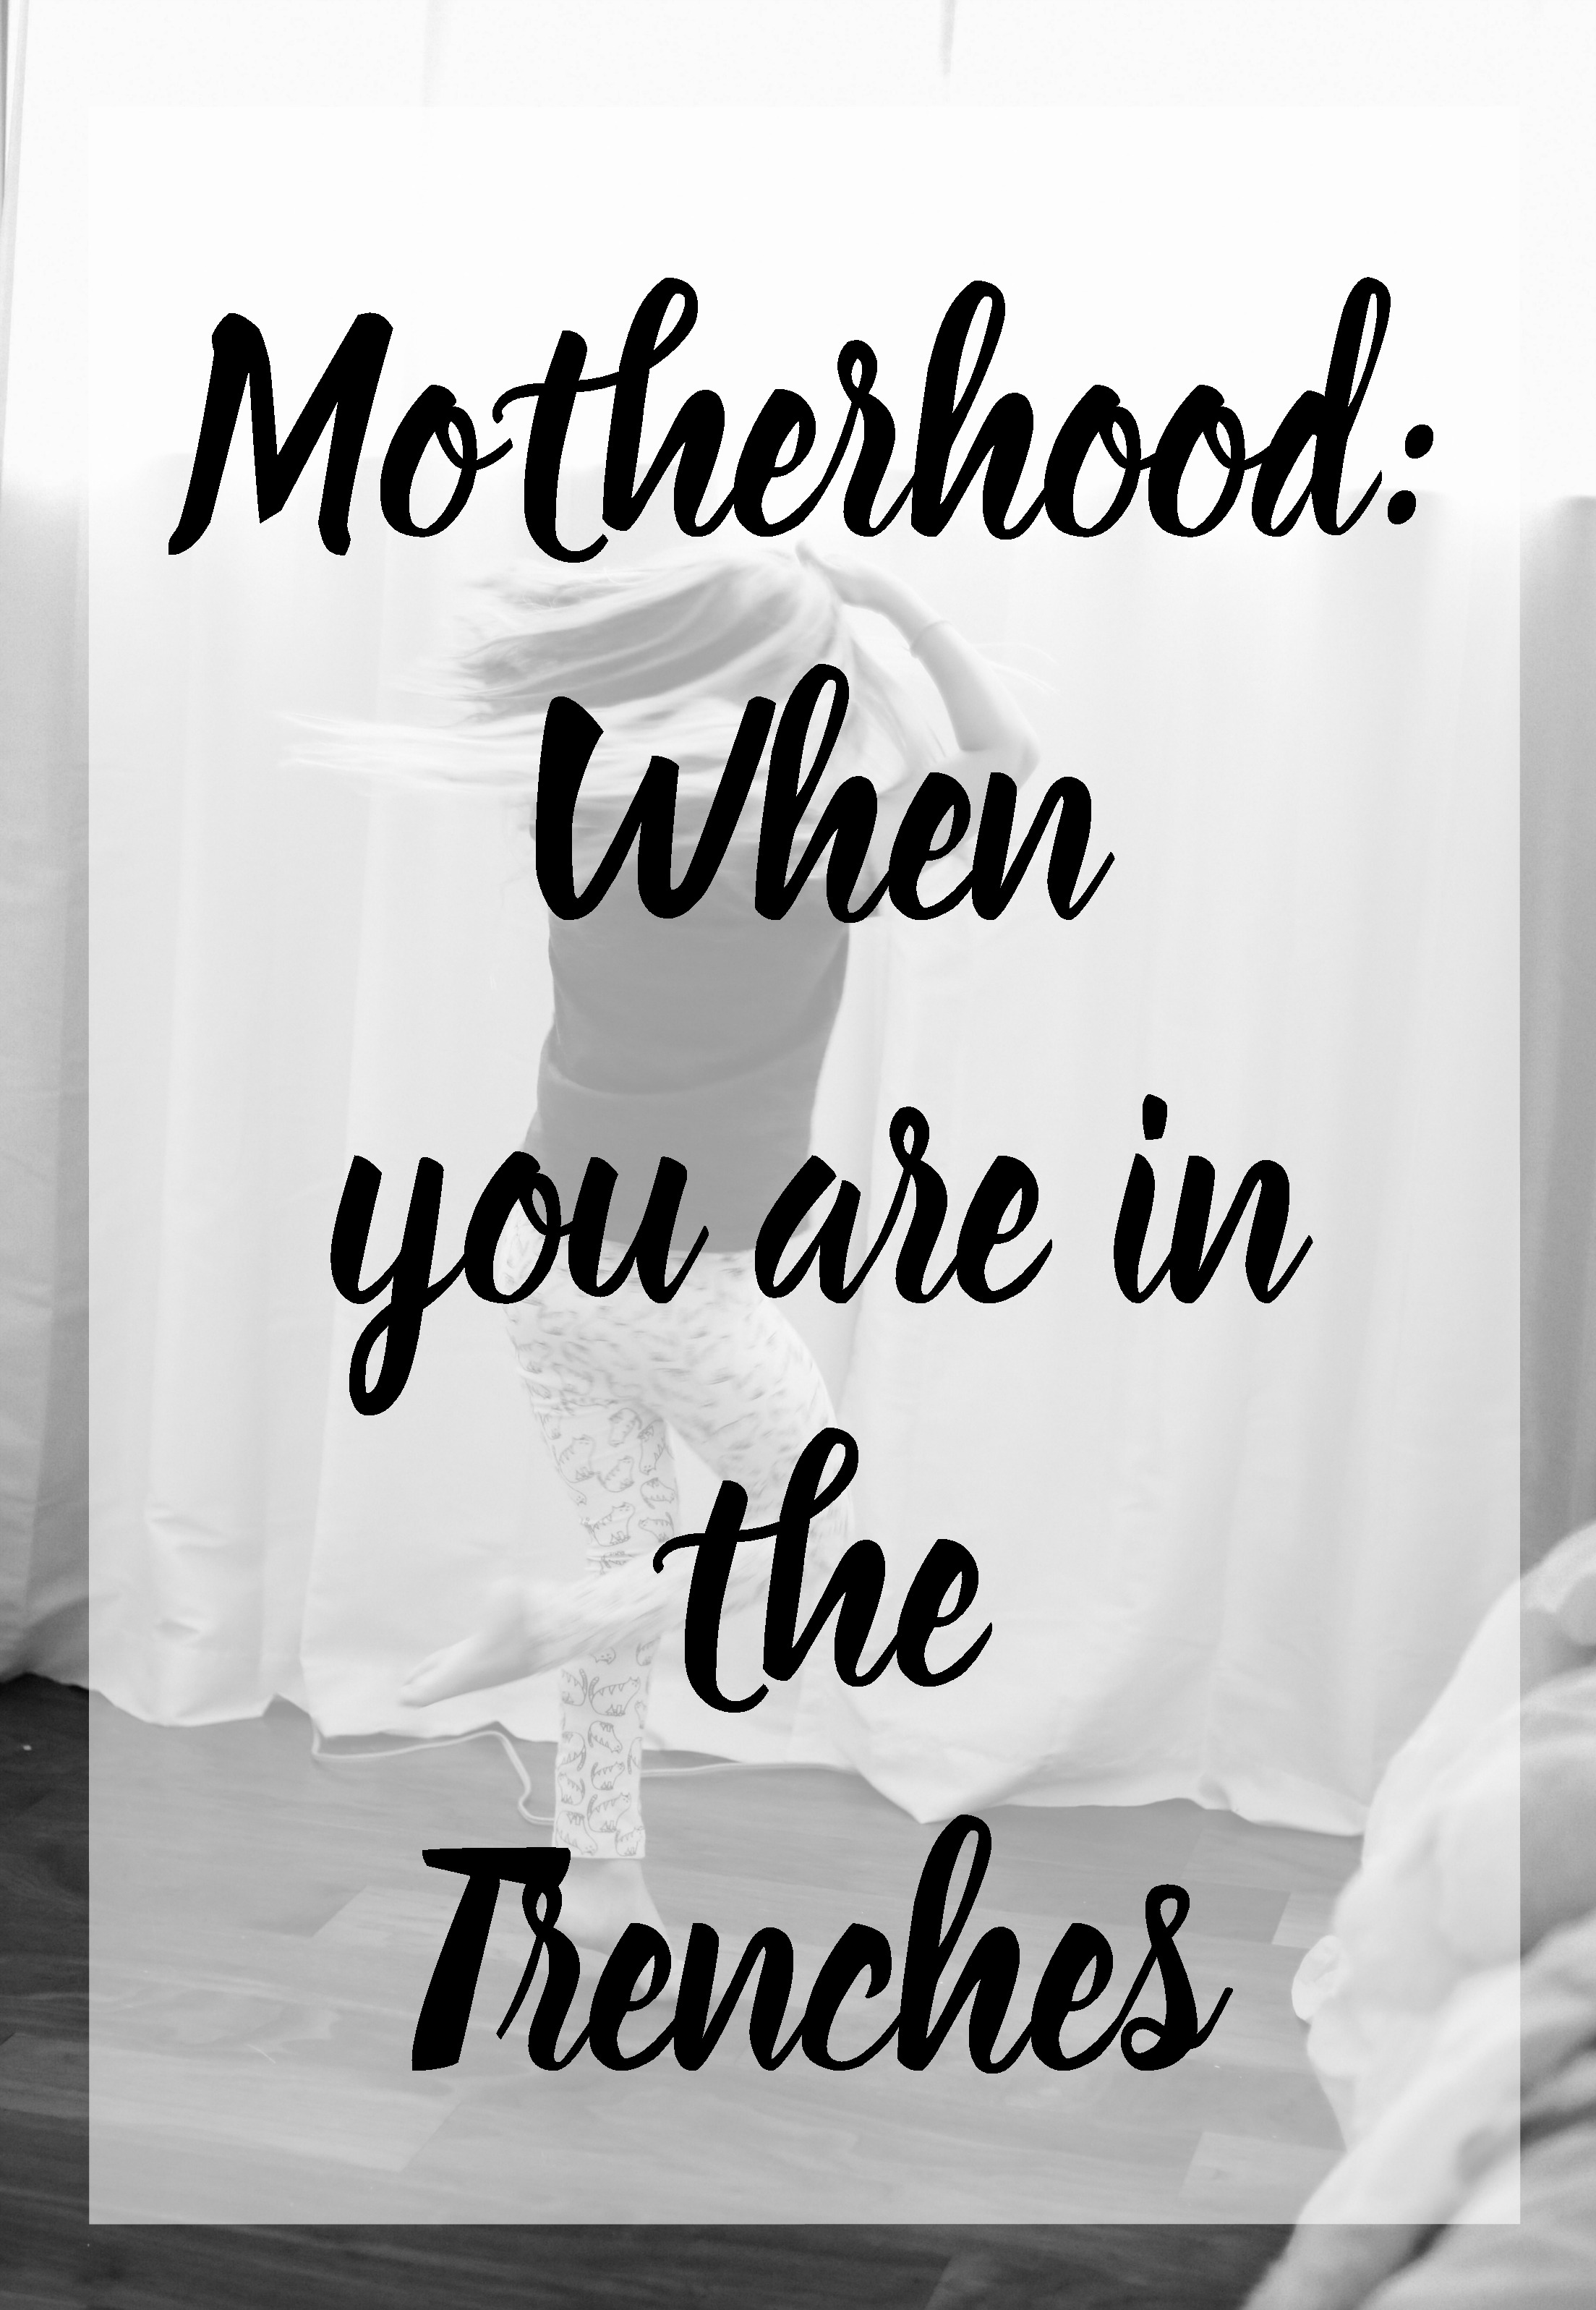 Motherhood: When you are in the Trenches